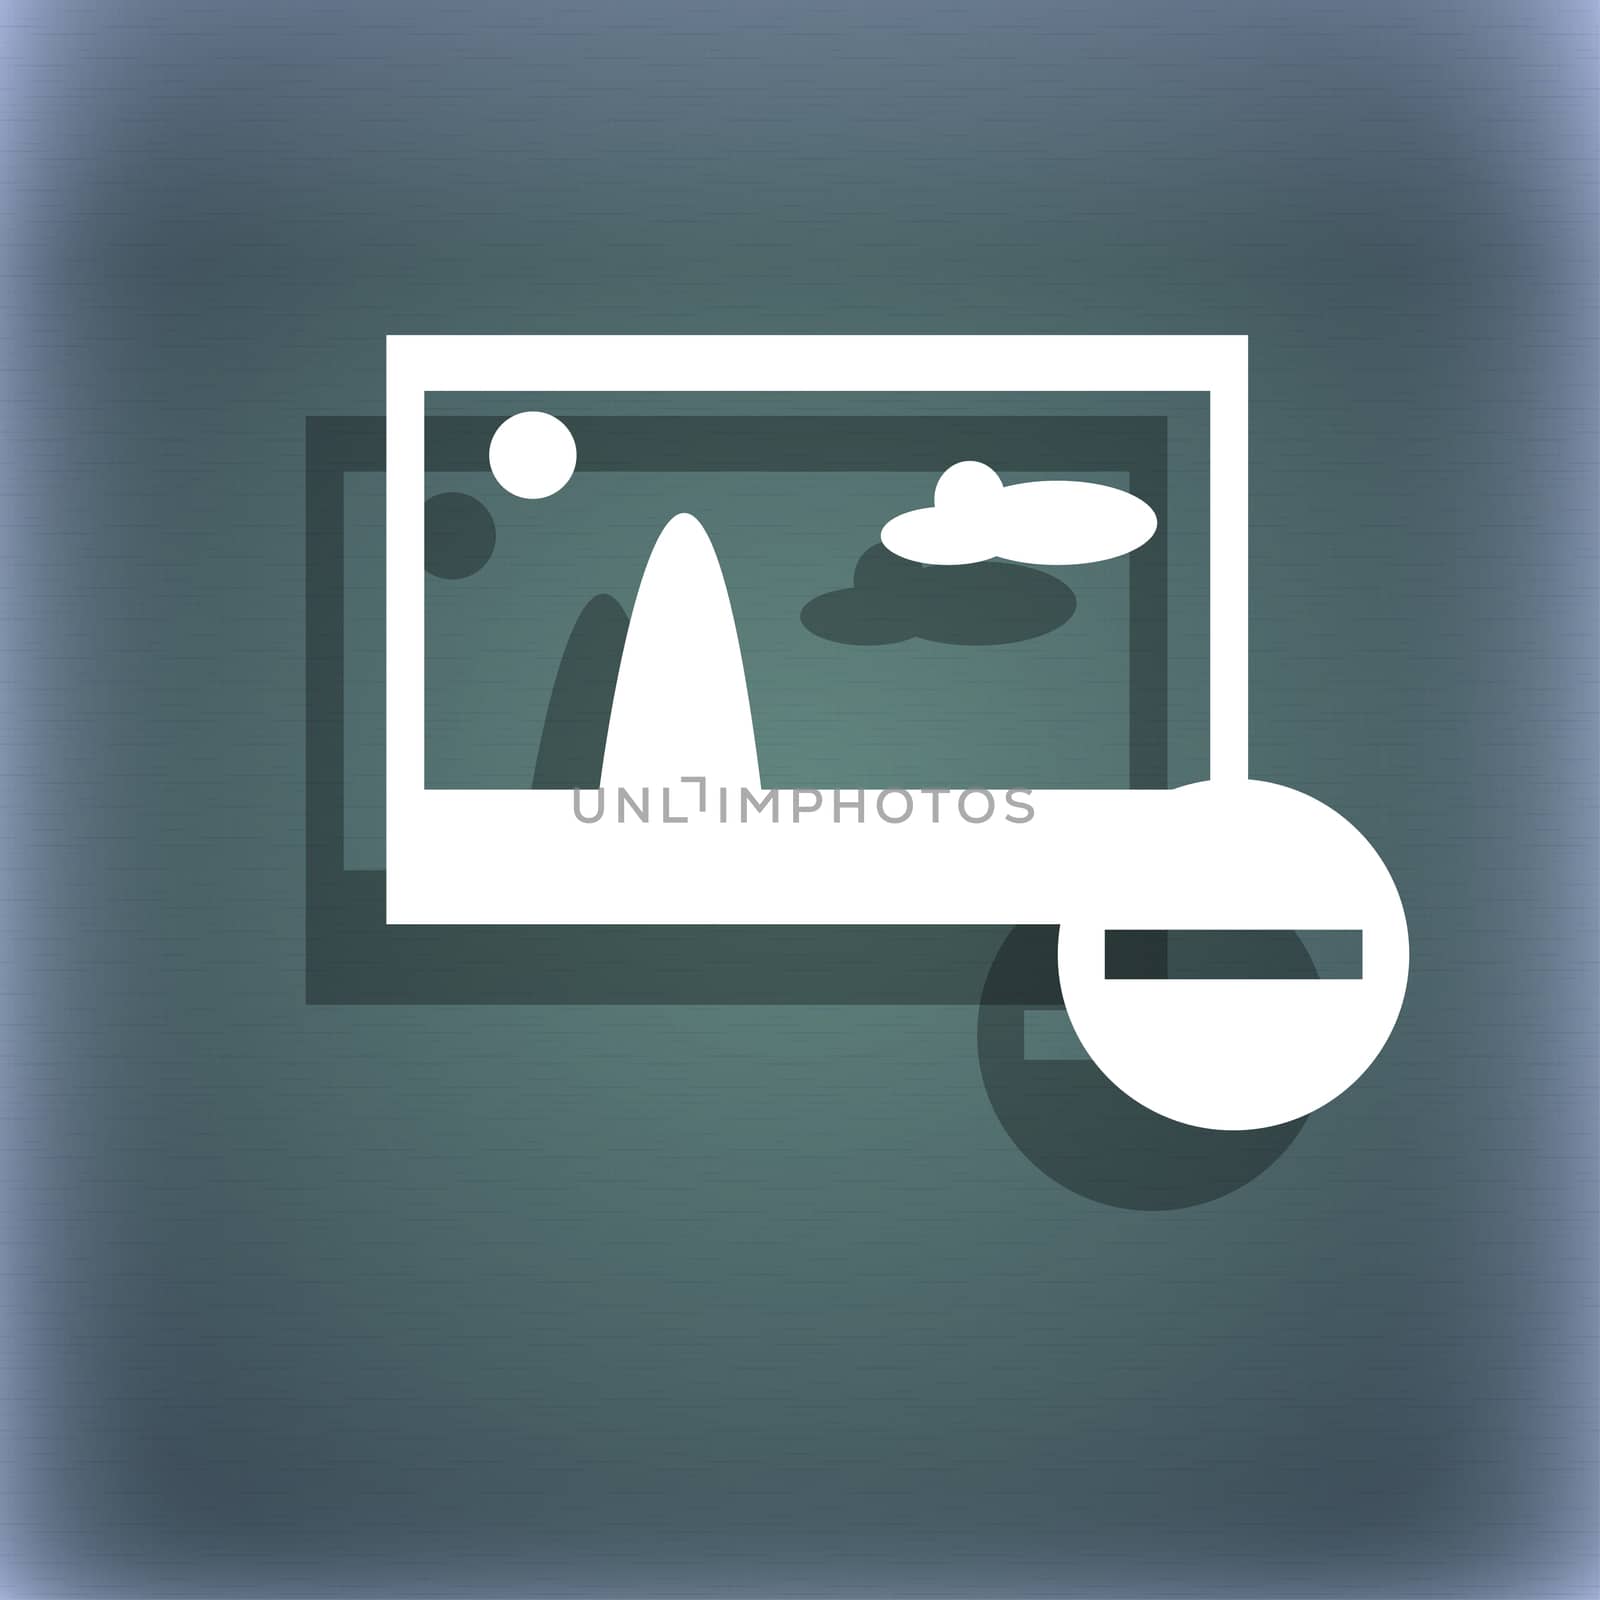 Minus File JPG sign icon. Download image file symbol. Set colourful buttons. On the blue-green abstract background with shadow and space for your text. illustration